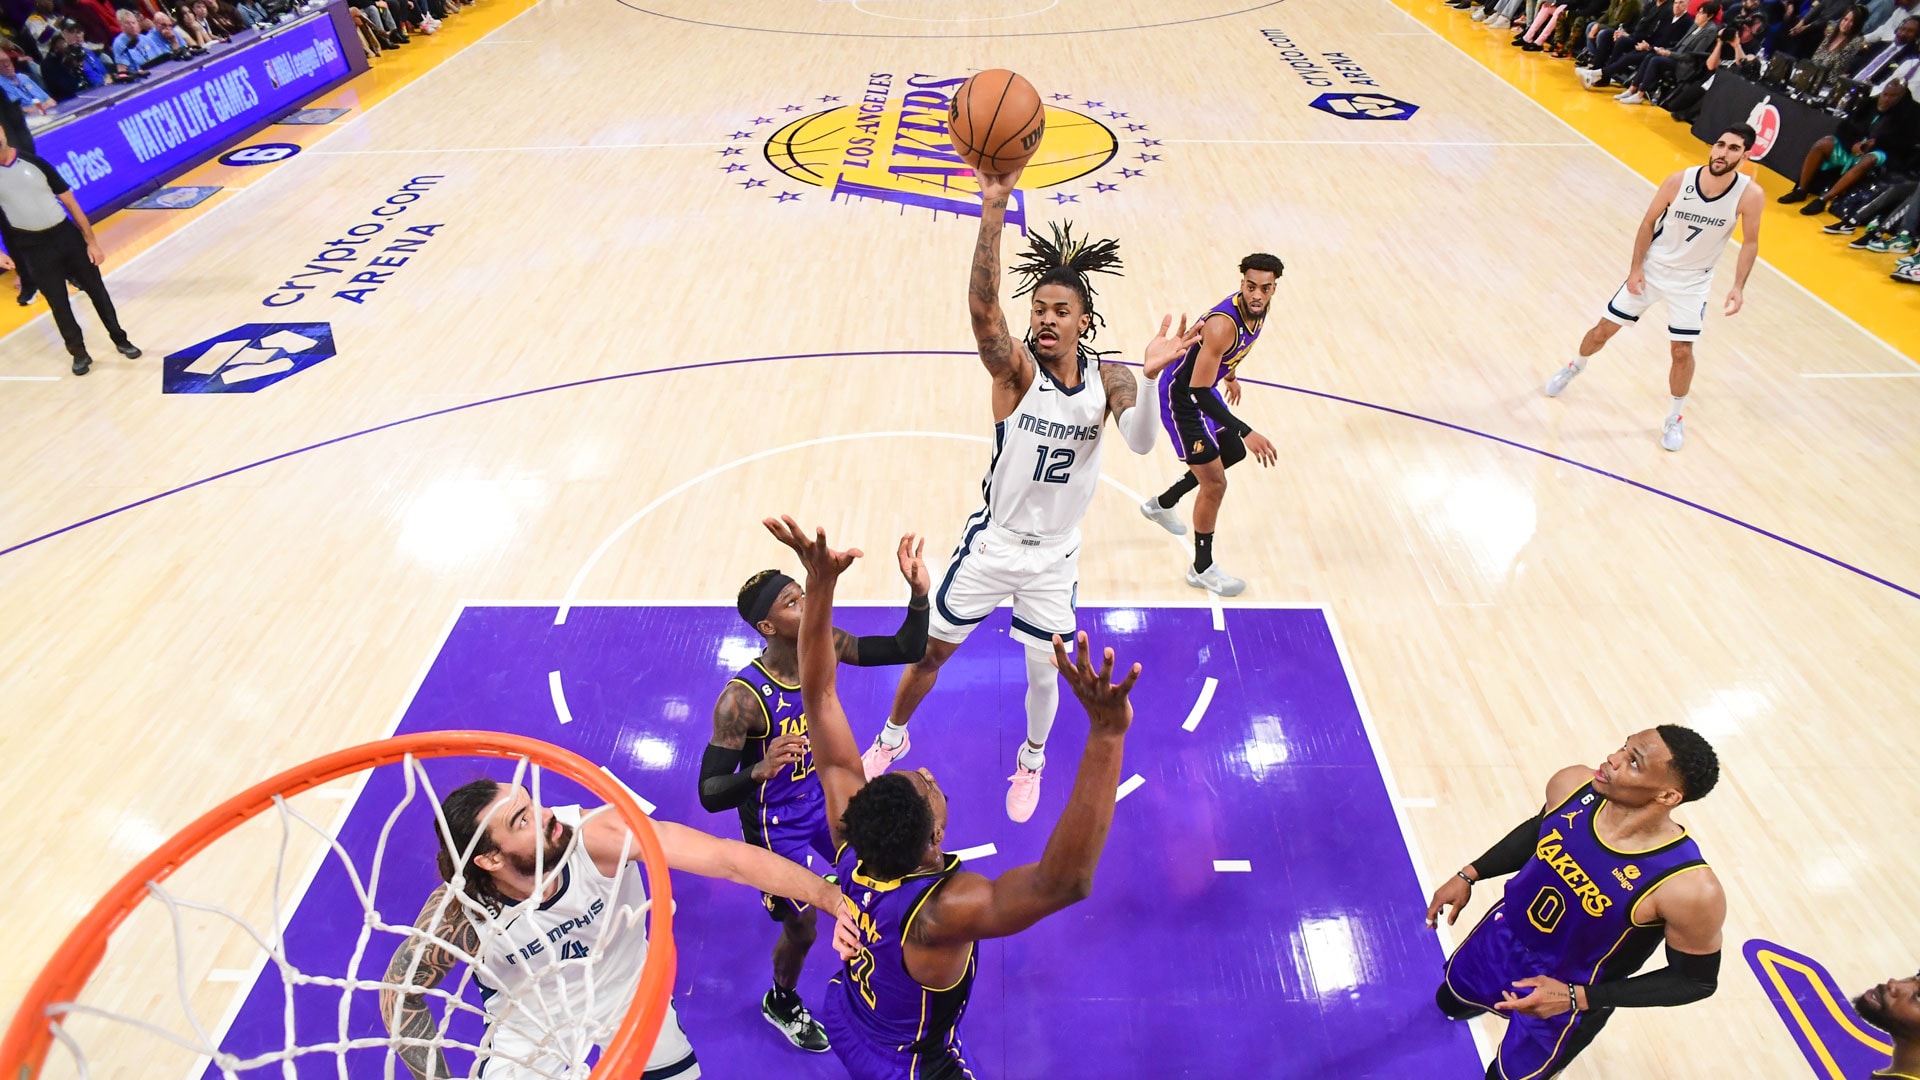 LOS ANGELES, CA - JANUARY 20: Ja Morant #12 of the Memphis Grizzlies drives to the basket during the game against the Los Angeles Lakers on January 20, 2023 at Crypto.Com Arena in Los Angeles, California.